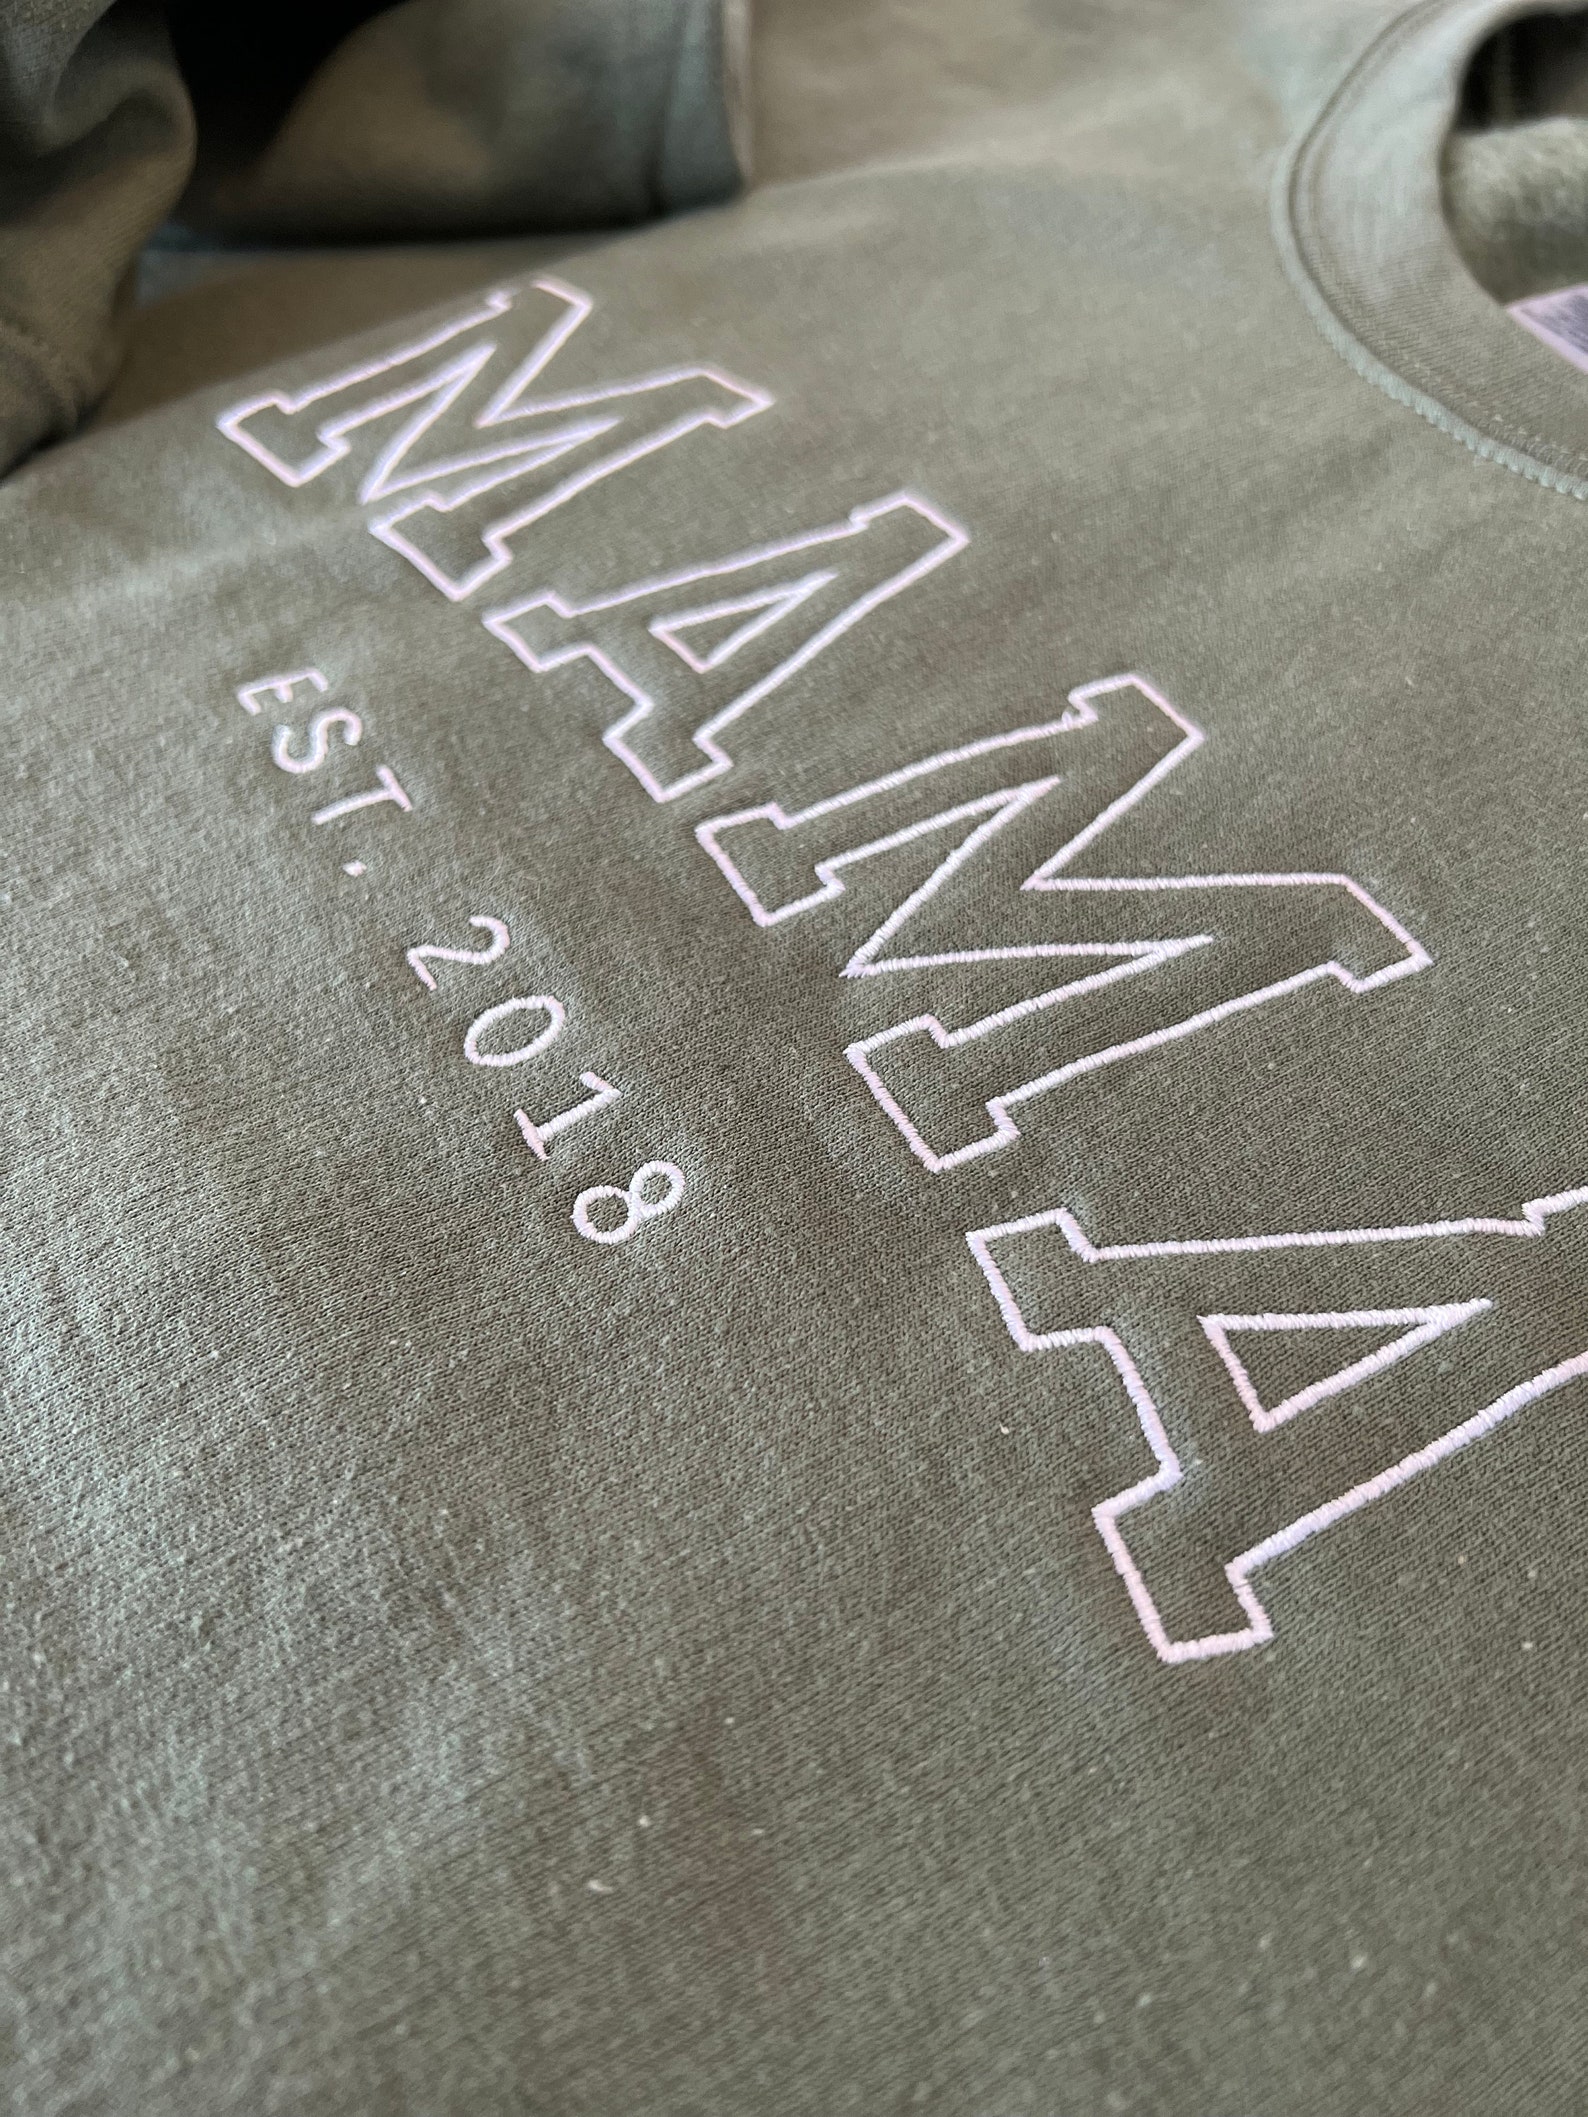 Custom Embroidered Sweatshirt for Mom Personalized Sleeve - Etsy